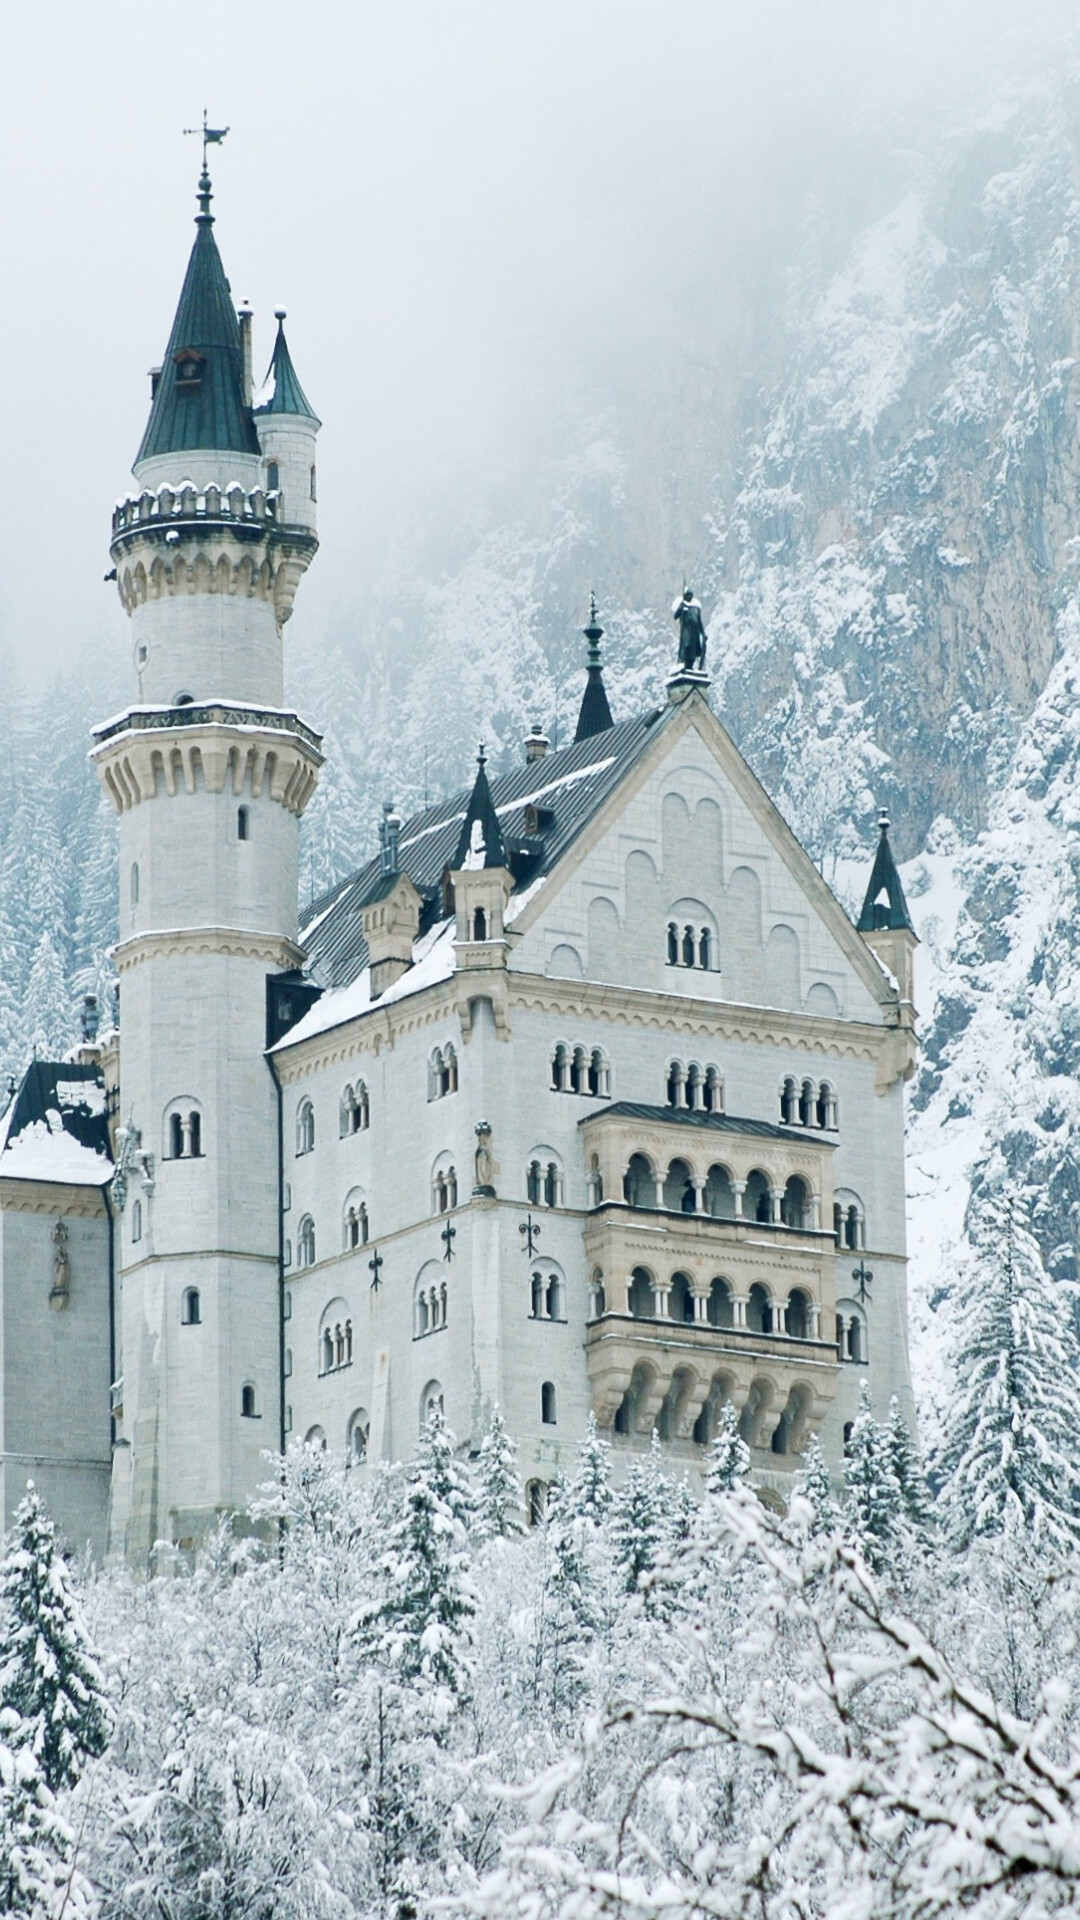 Neuschwanstein Castle: One of the most popular attractions of Germany, Bavaria. 1080x1920 Full HD Wallpaper.